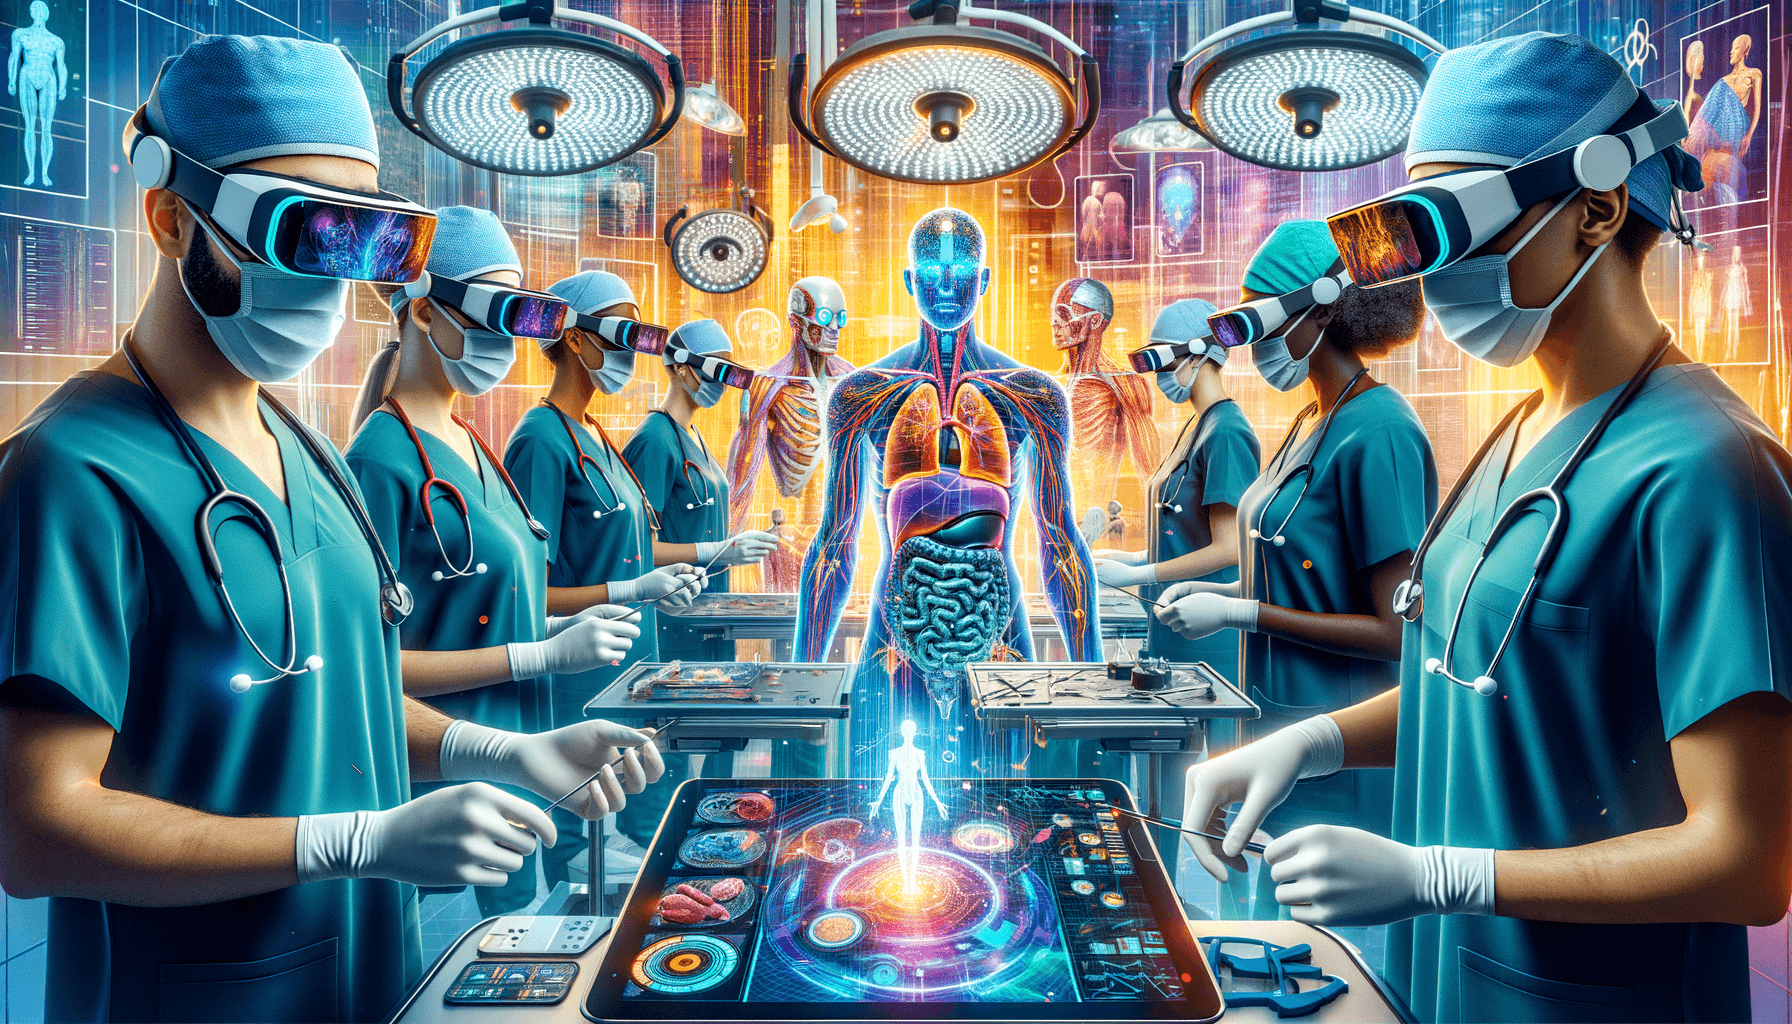 "Surgeon performing precision operation with AR headset showcasing advanced medical technology by Gravity Jack in the rapidly growing $5.1 billion AR/VR healthcare market."